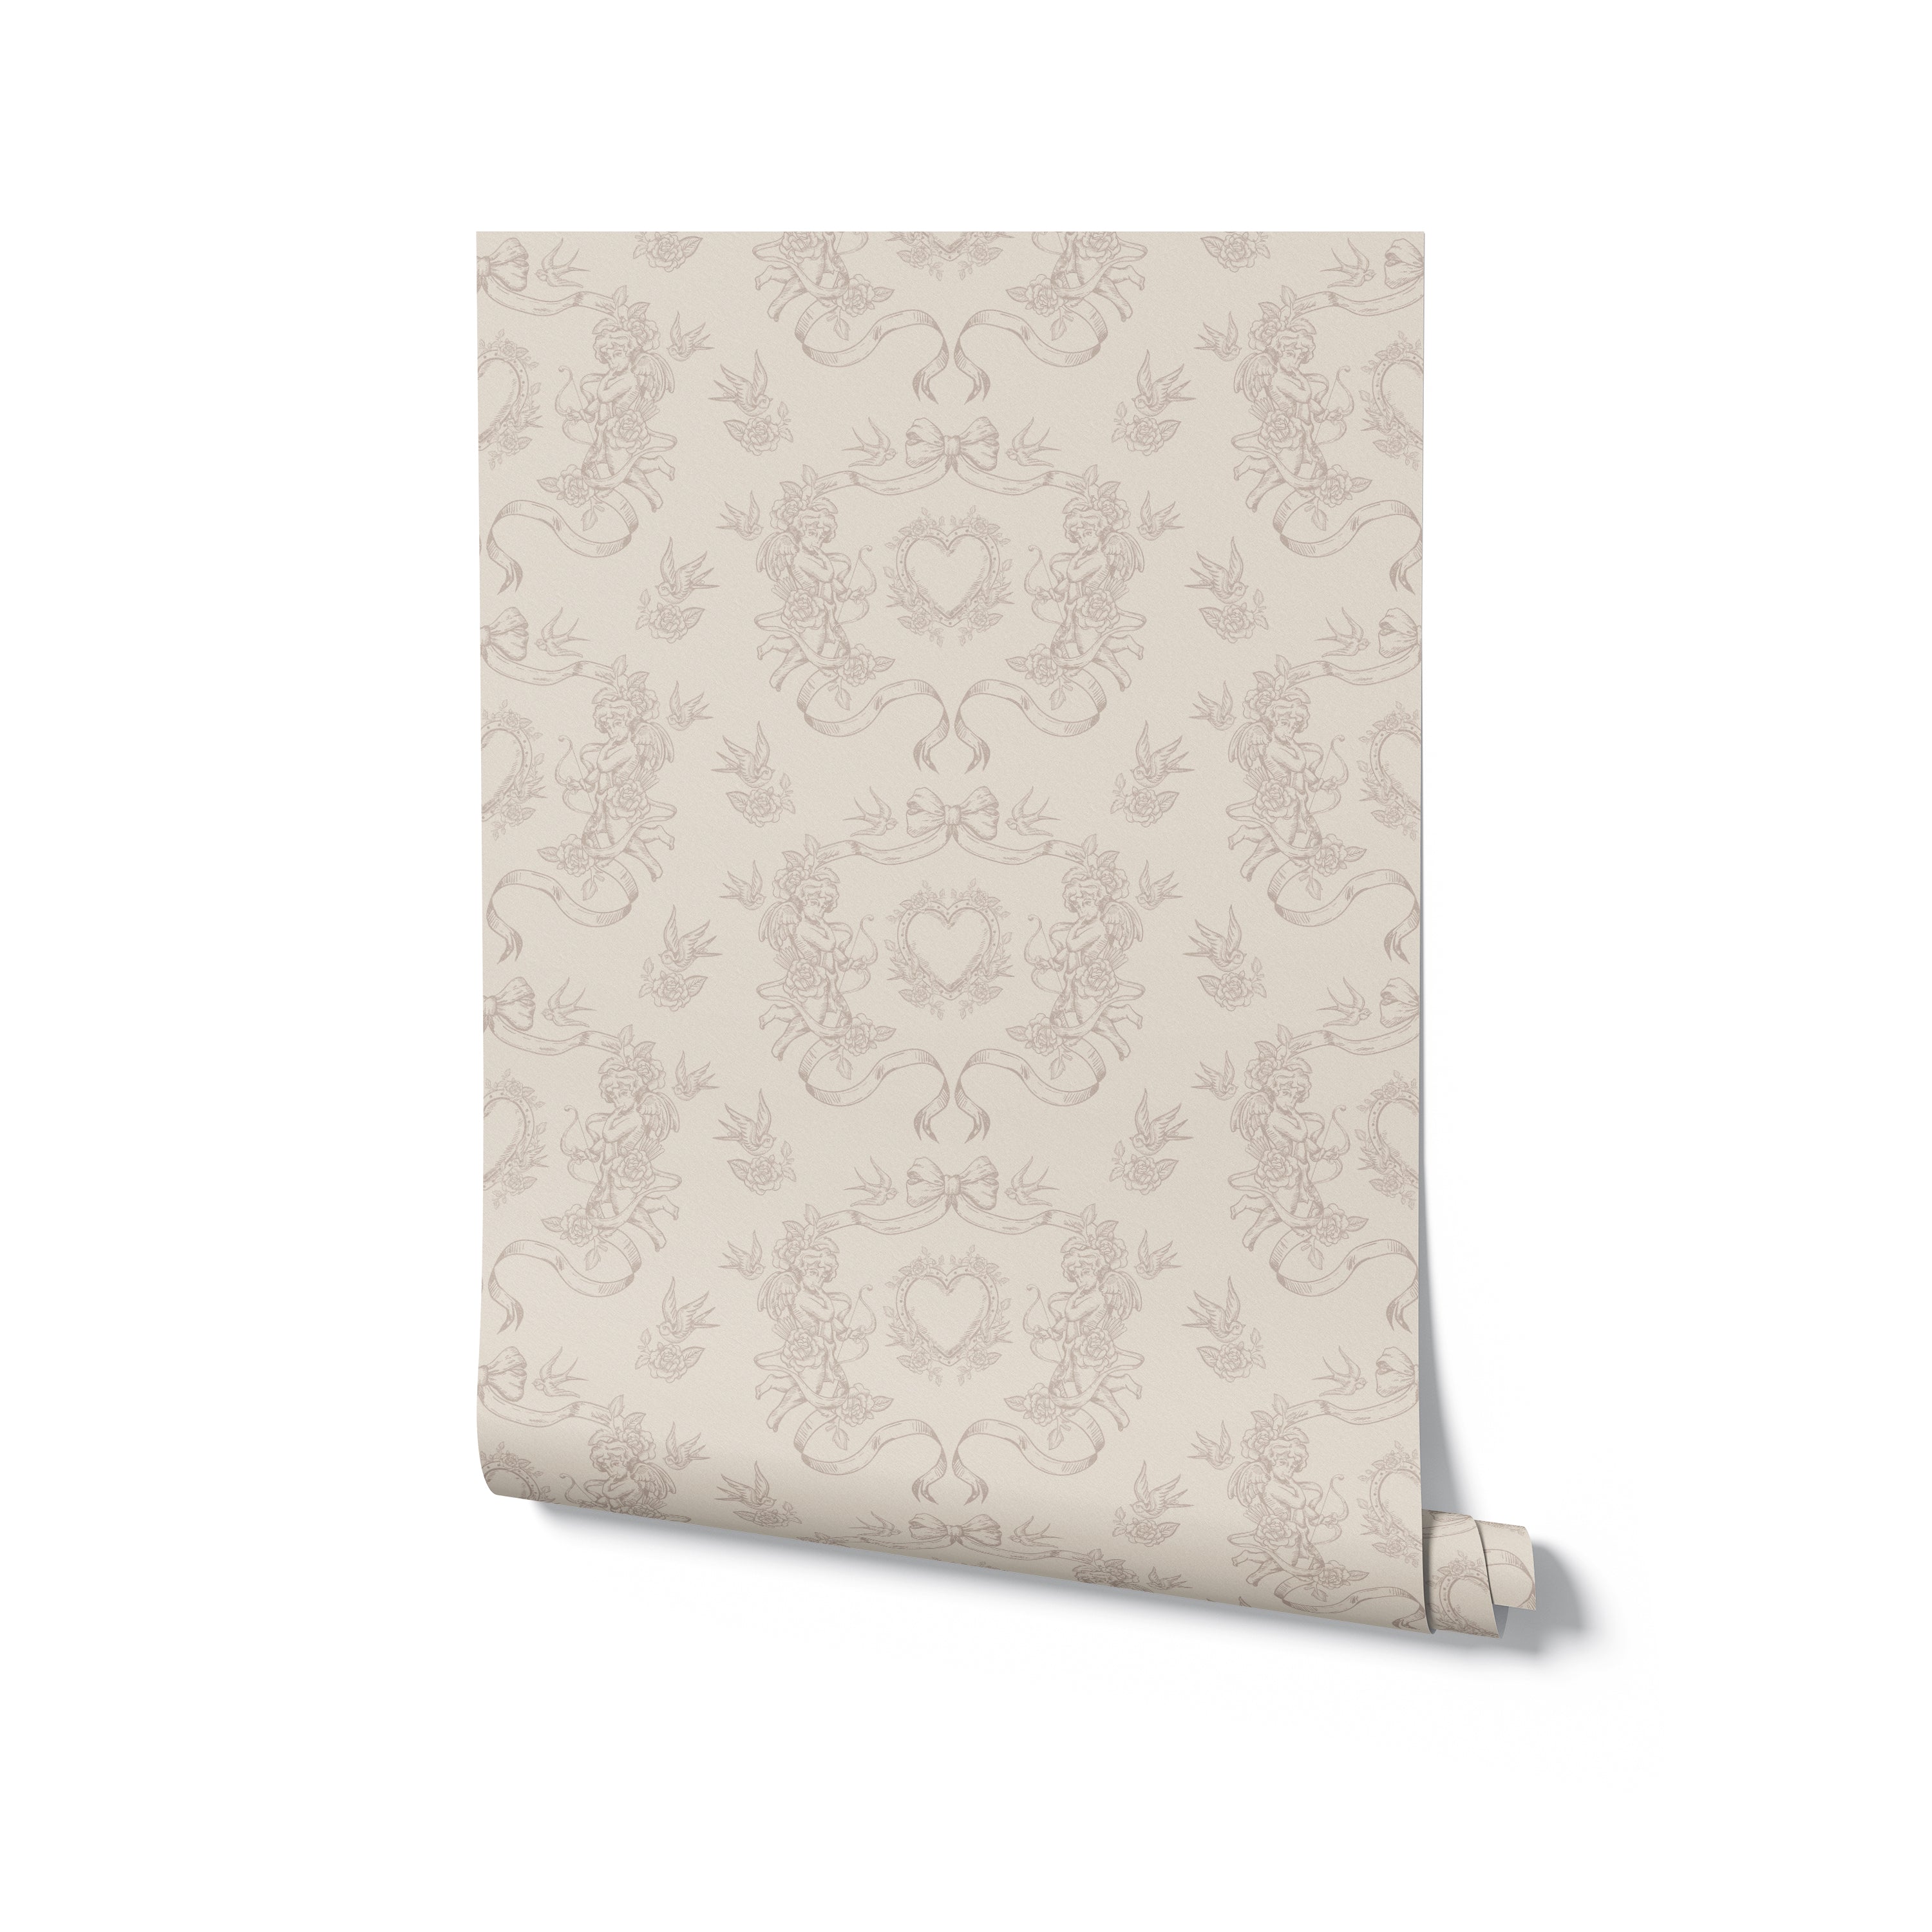 A roll of Cupid's Charm Wallpaper, displaying its beige background with intricate cherub, heart, and ribbon patterns, perfect for adding a romantic touch to any room.